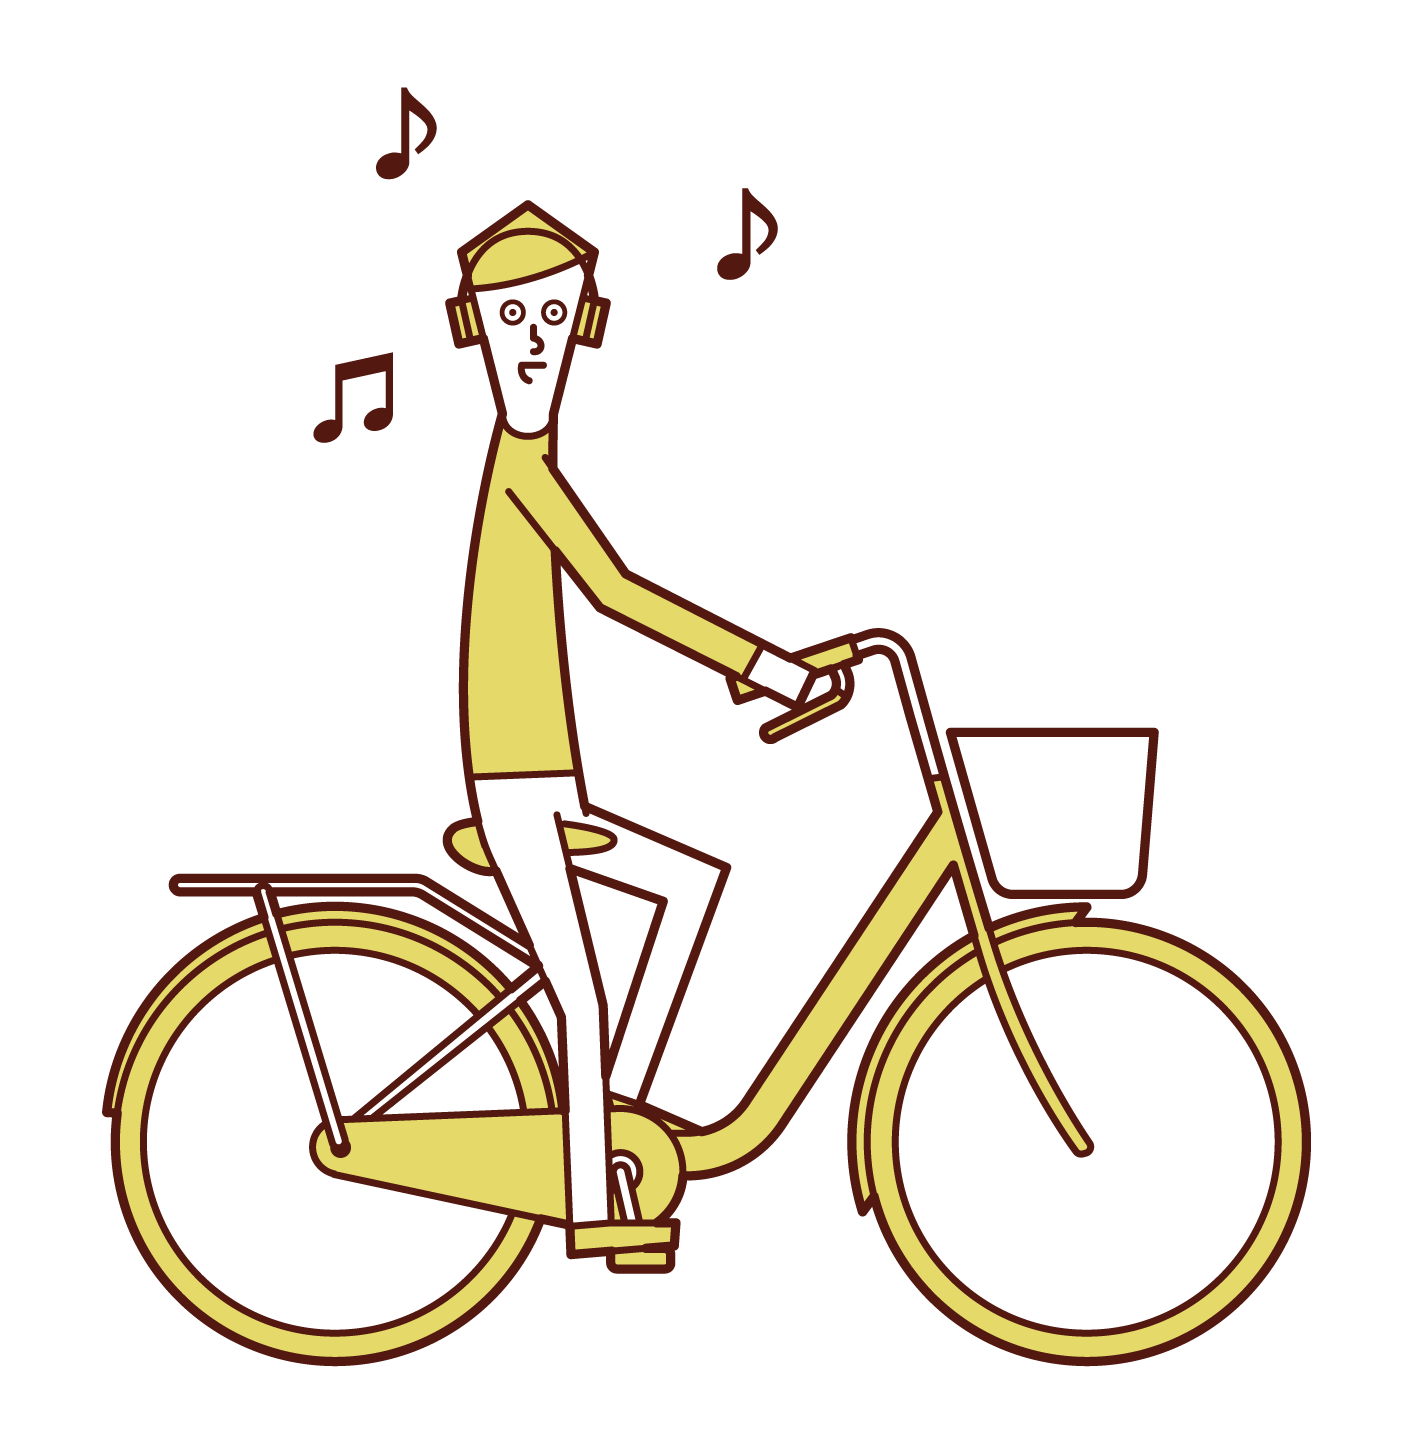 Illustration of a man driving a bicycle while listening to music with headphones